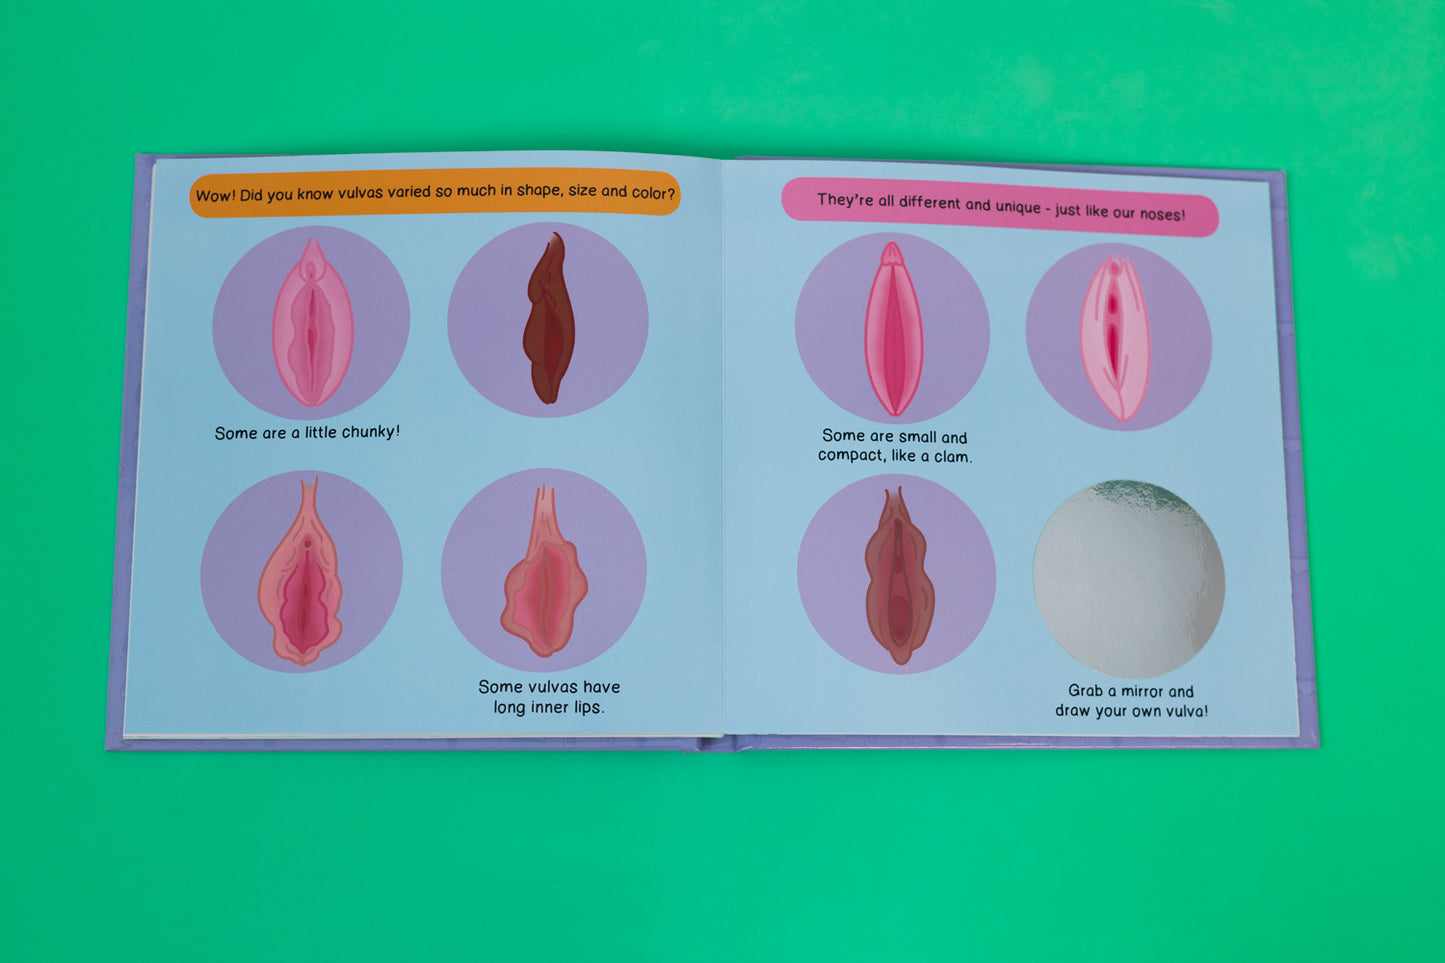 Vaginas and Periods 101 | A Pop-Up Book